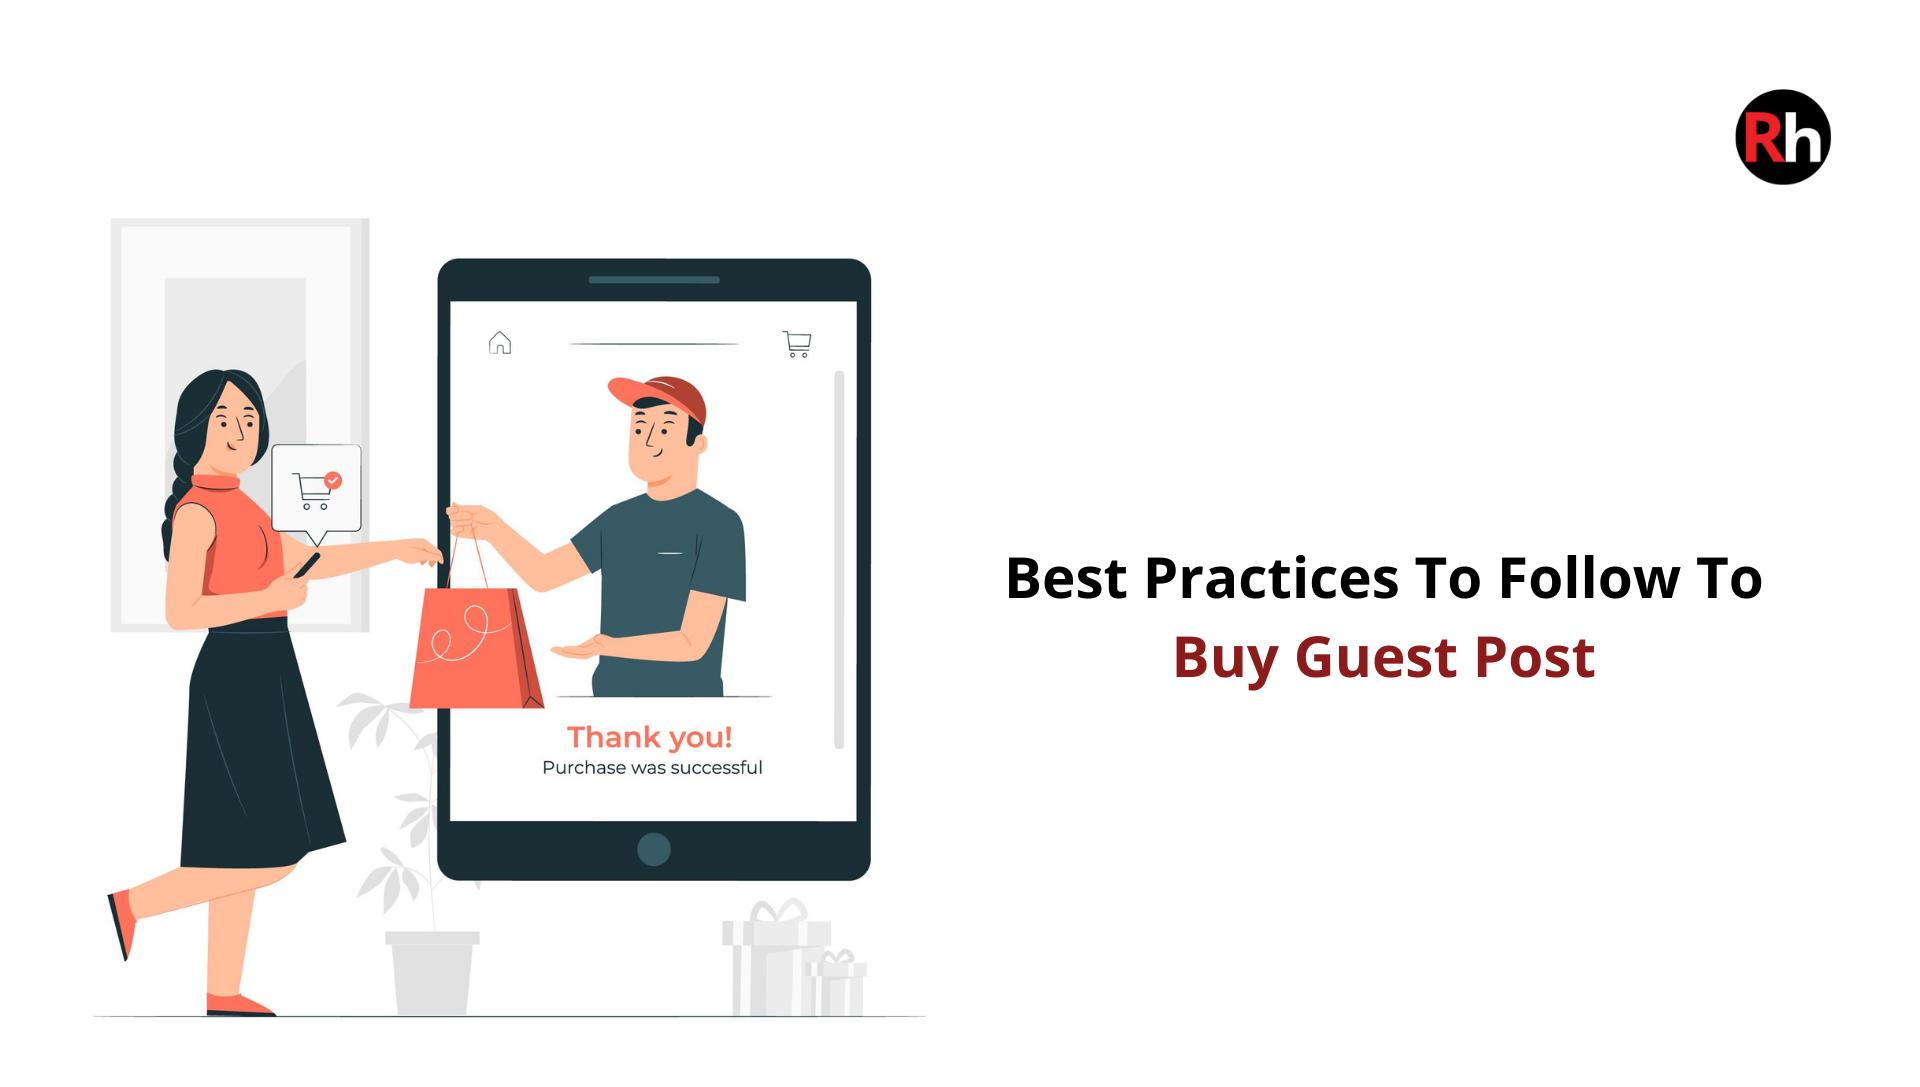 Best Practices To Follow To Buy Guest Post